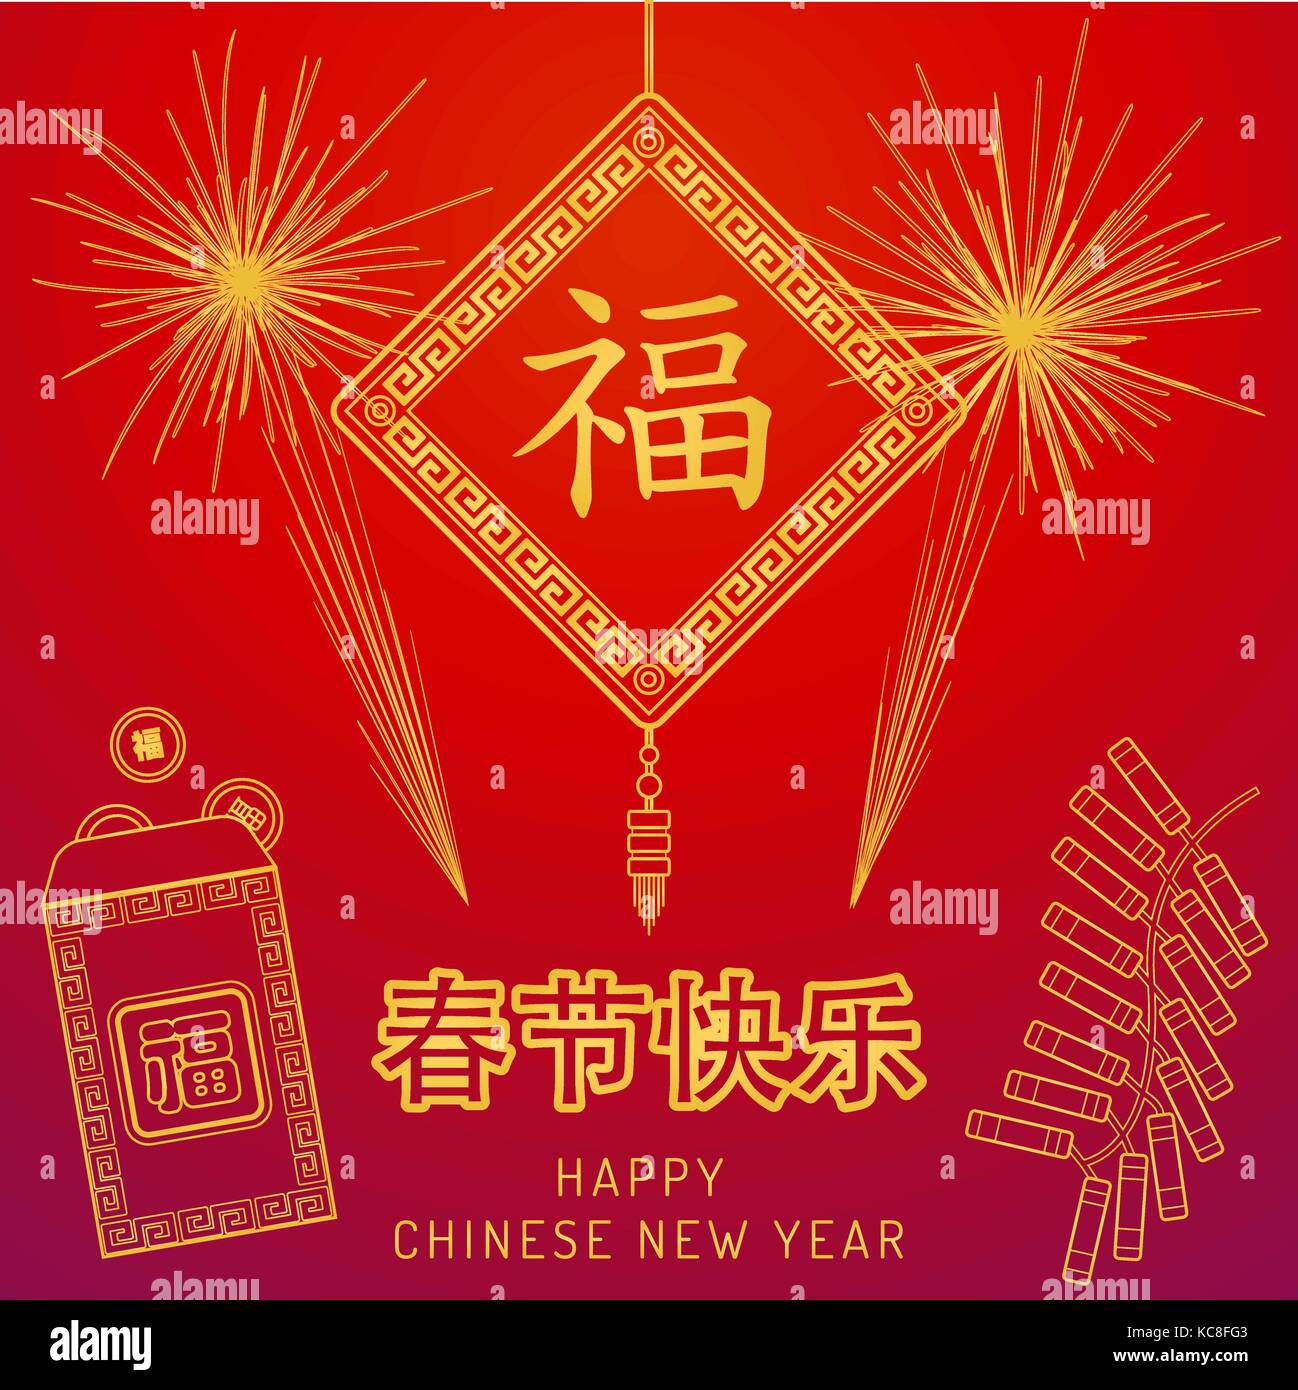 vector gold colors outline postcard design traditional Chinese Lunar New Year poster with red envelopes fireworks, firecrackers and Fu character decor Stock Vector